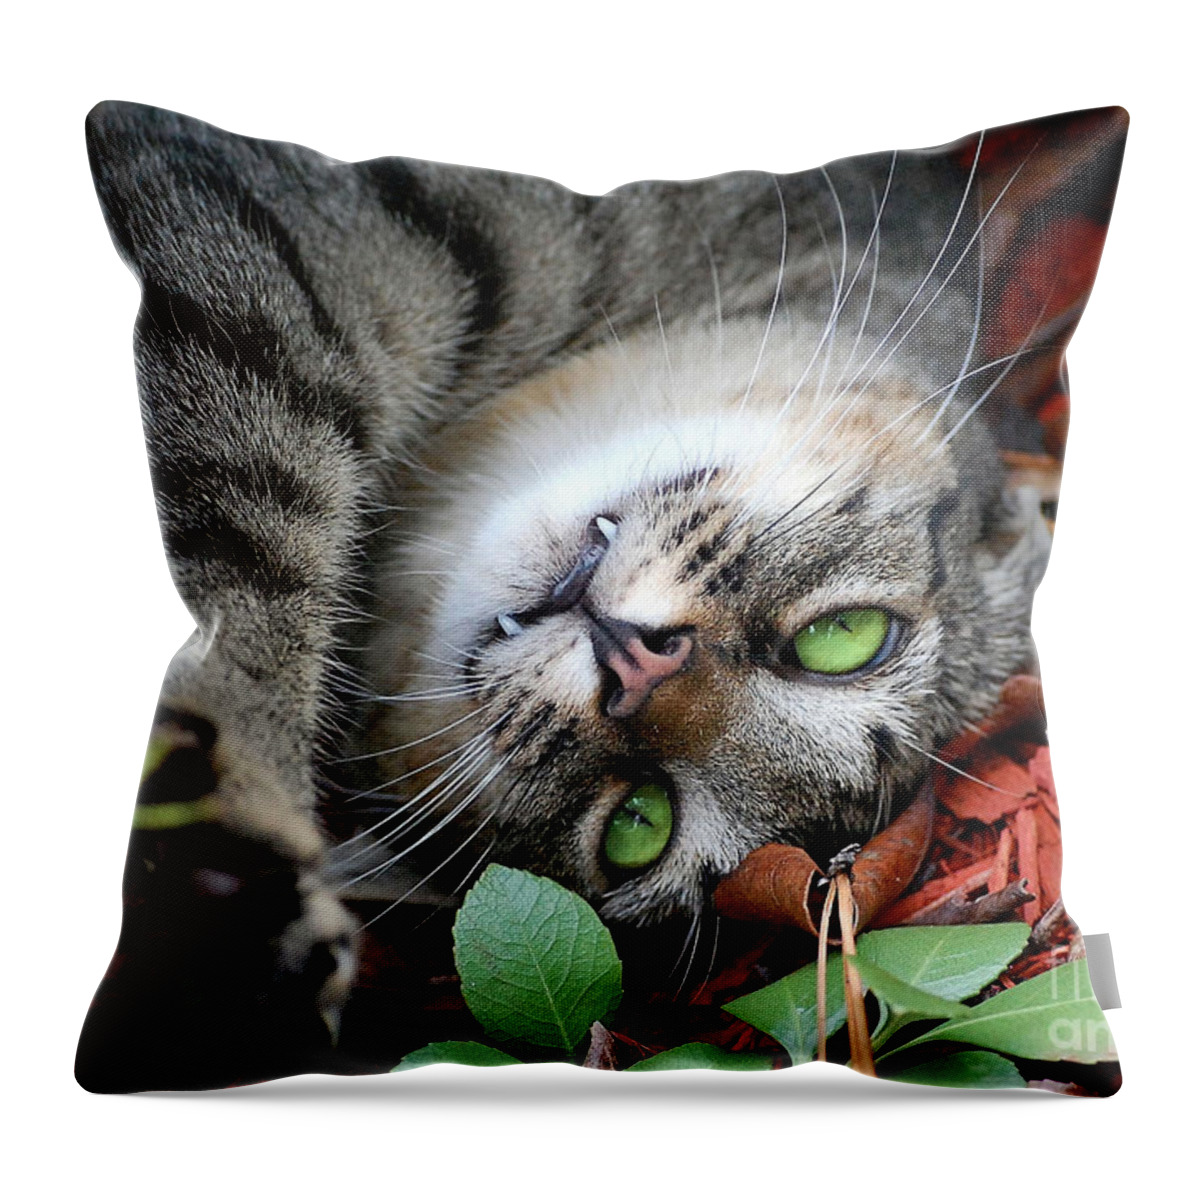 Animals Throw Pillow featuring the photograph Playtime by Kathy Baccari